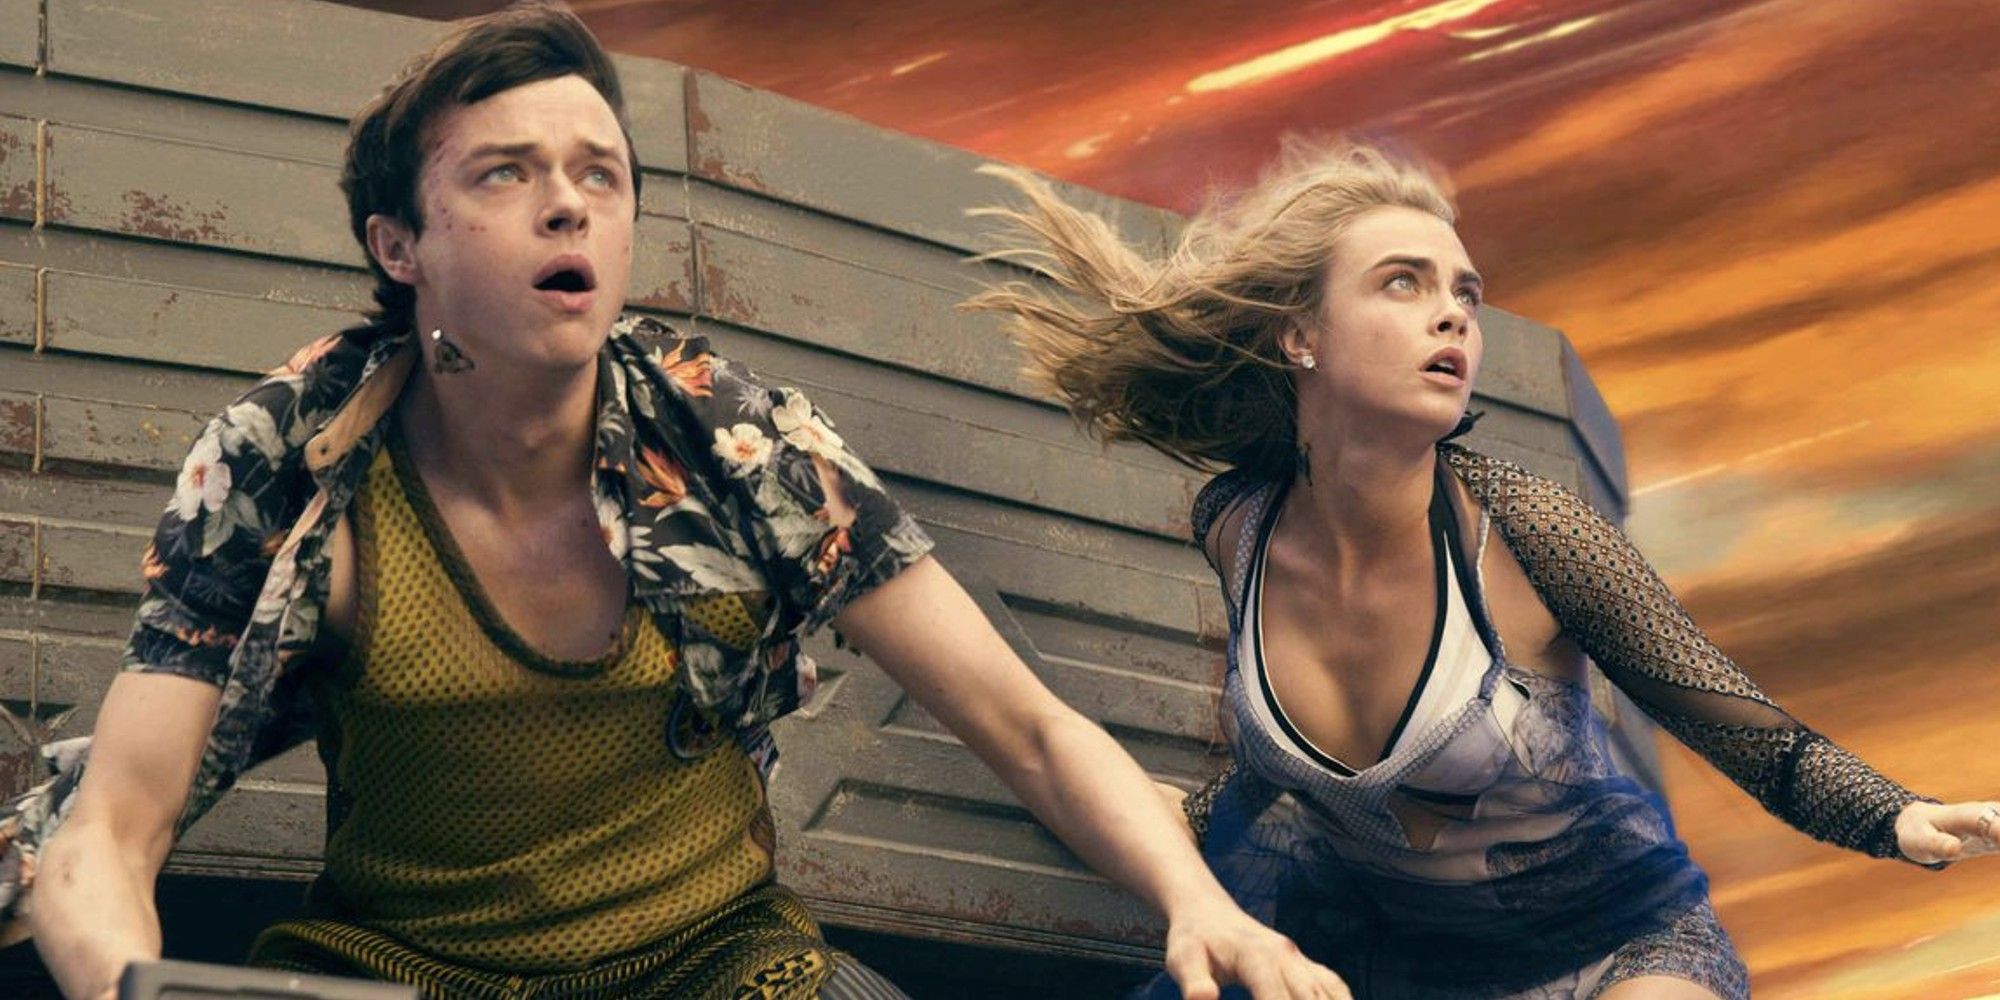 Dane DeHaan and Cara Delevingne in 'Valerian and The City of a Thousand Planets'